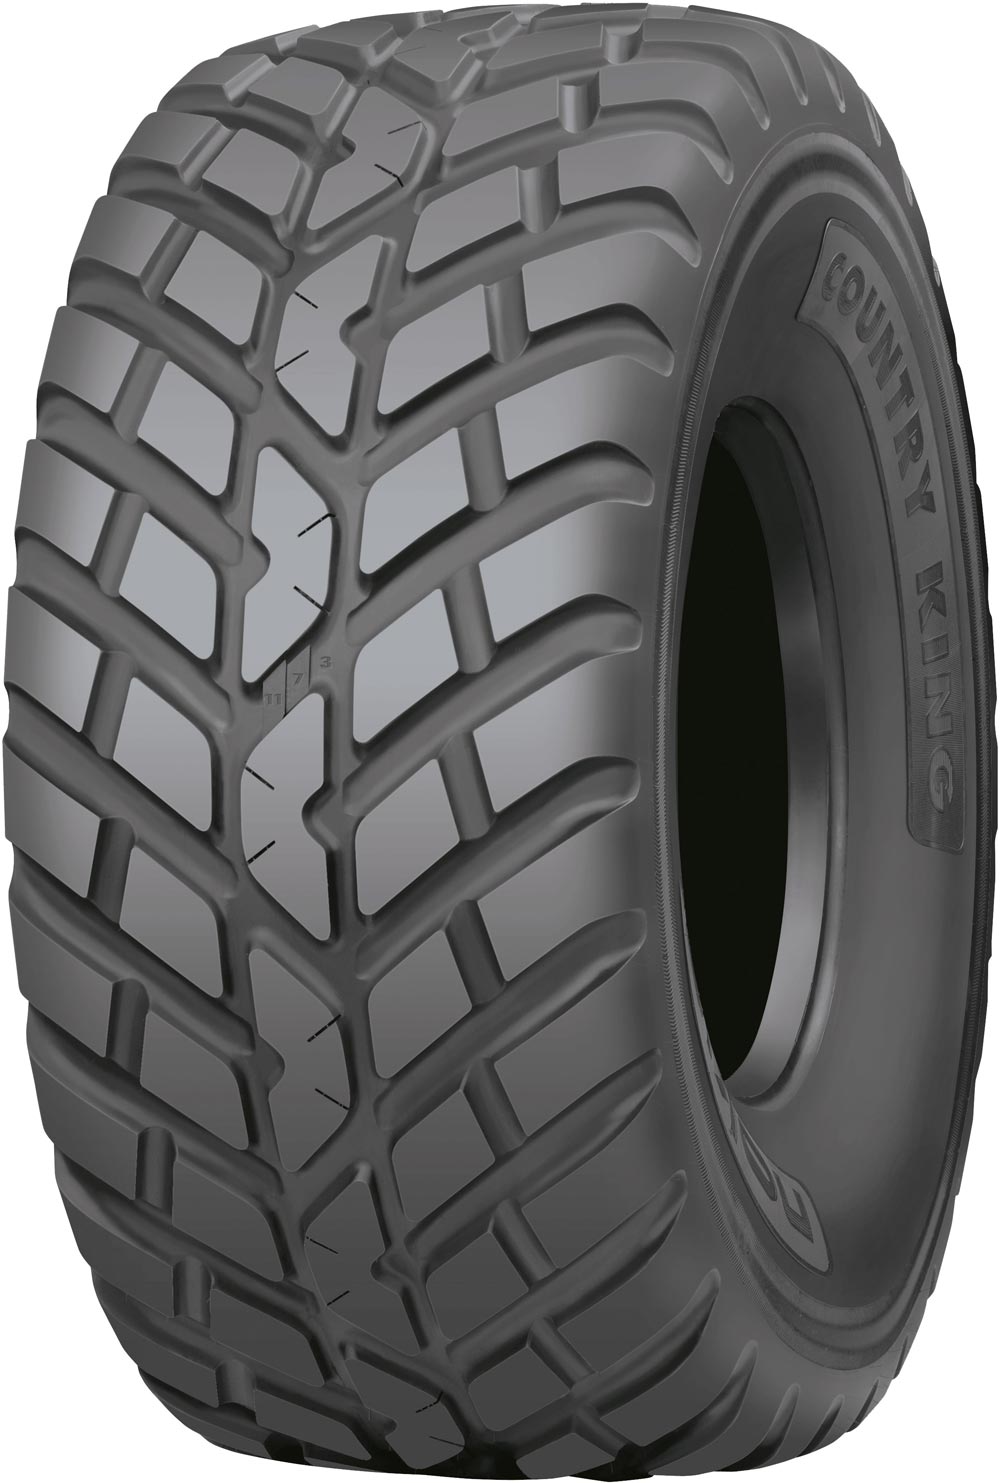 Индустриални гуми NOKIAN COUNTRY KING TL 600/55 R26.5 165D